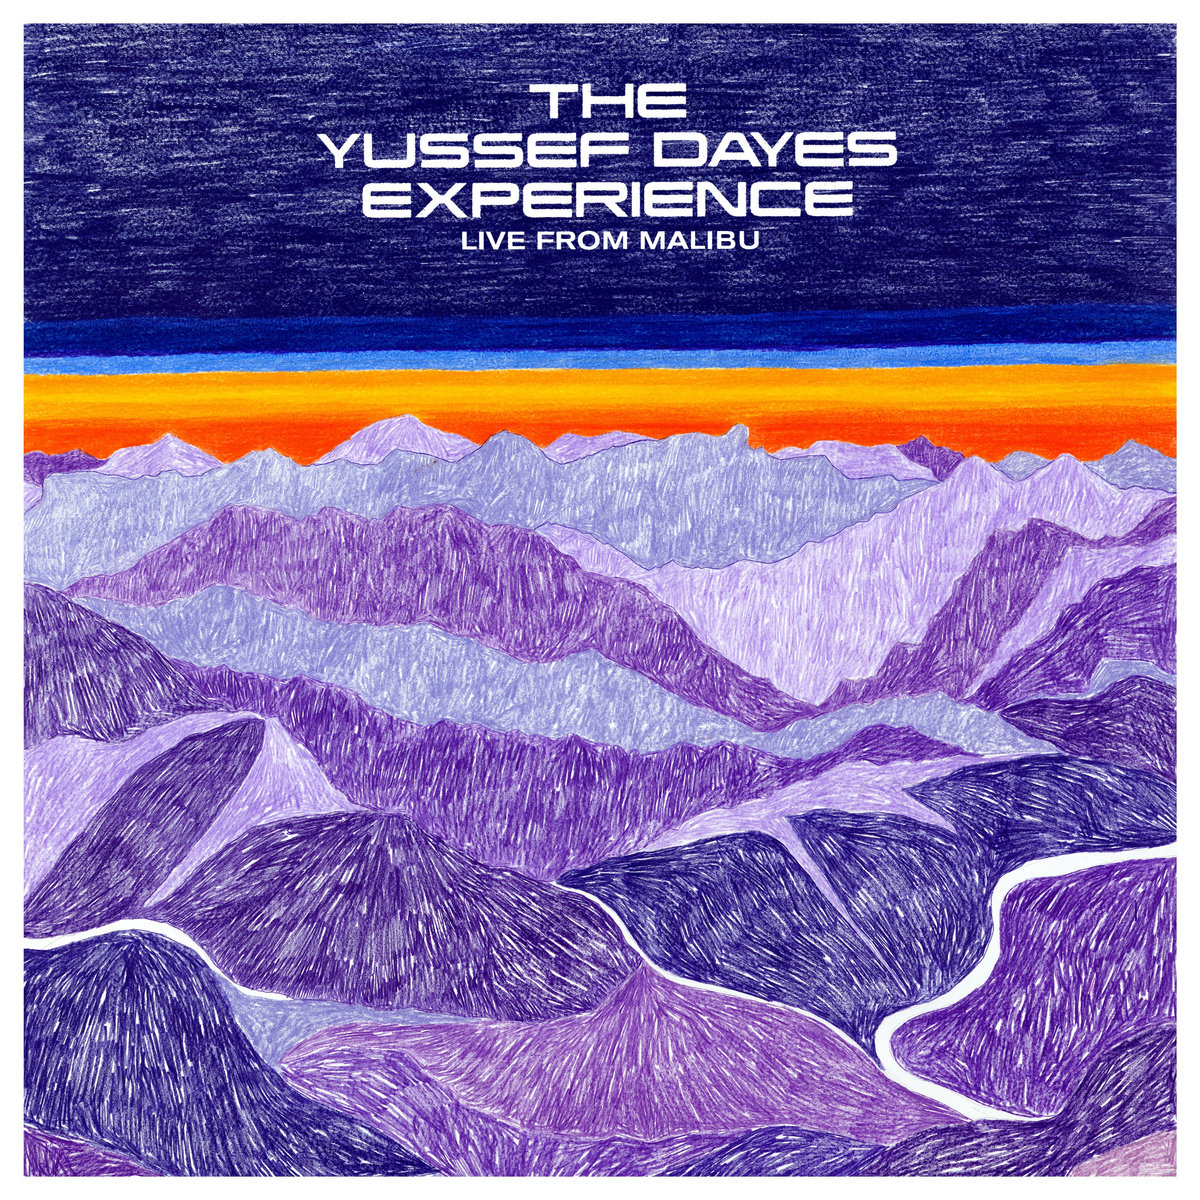 YUSSEF DAYES EXPERIENCE - LIVE FROM MALIBU - LP